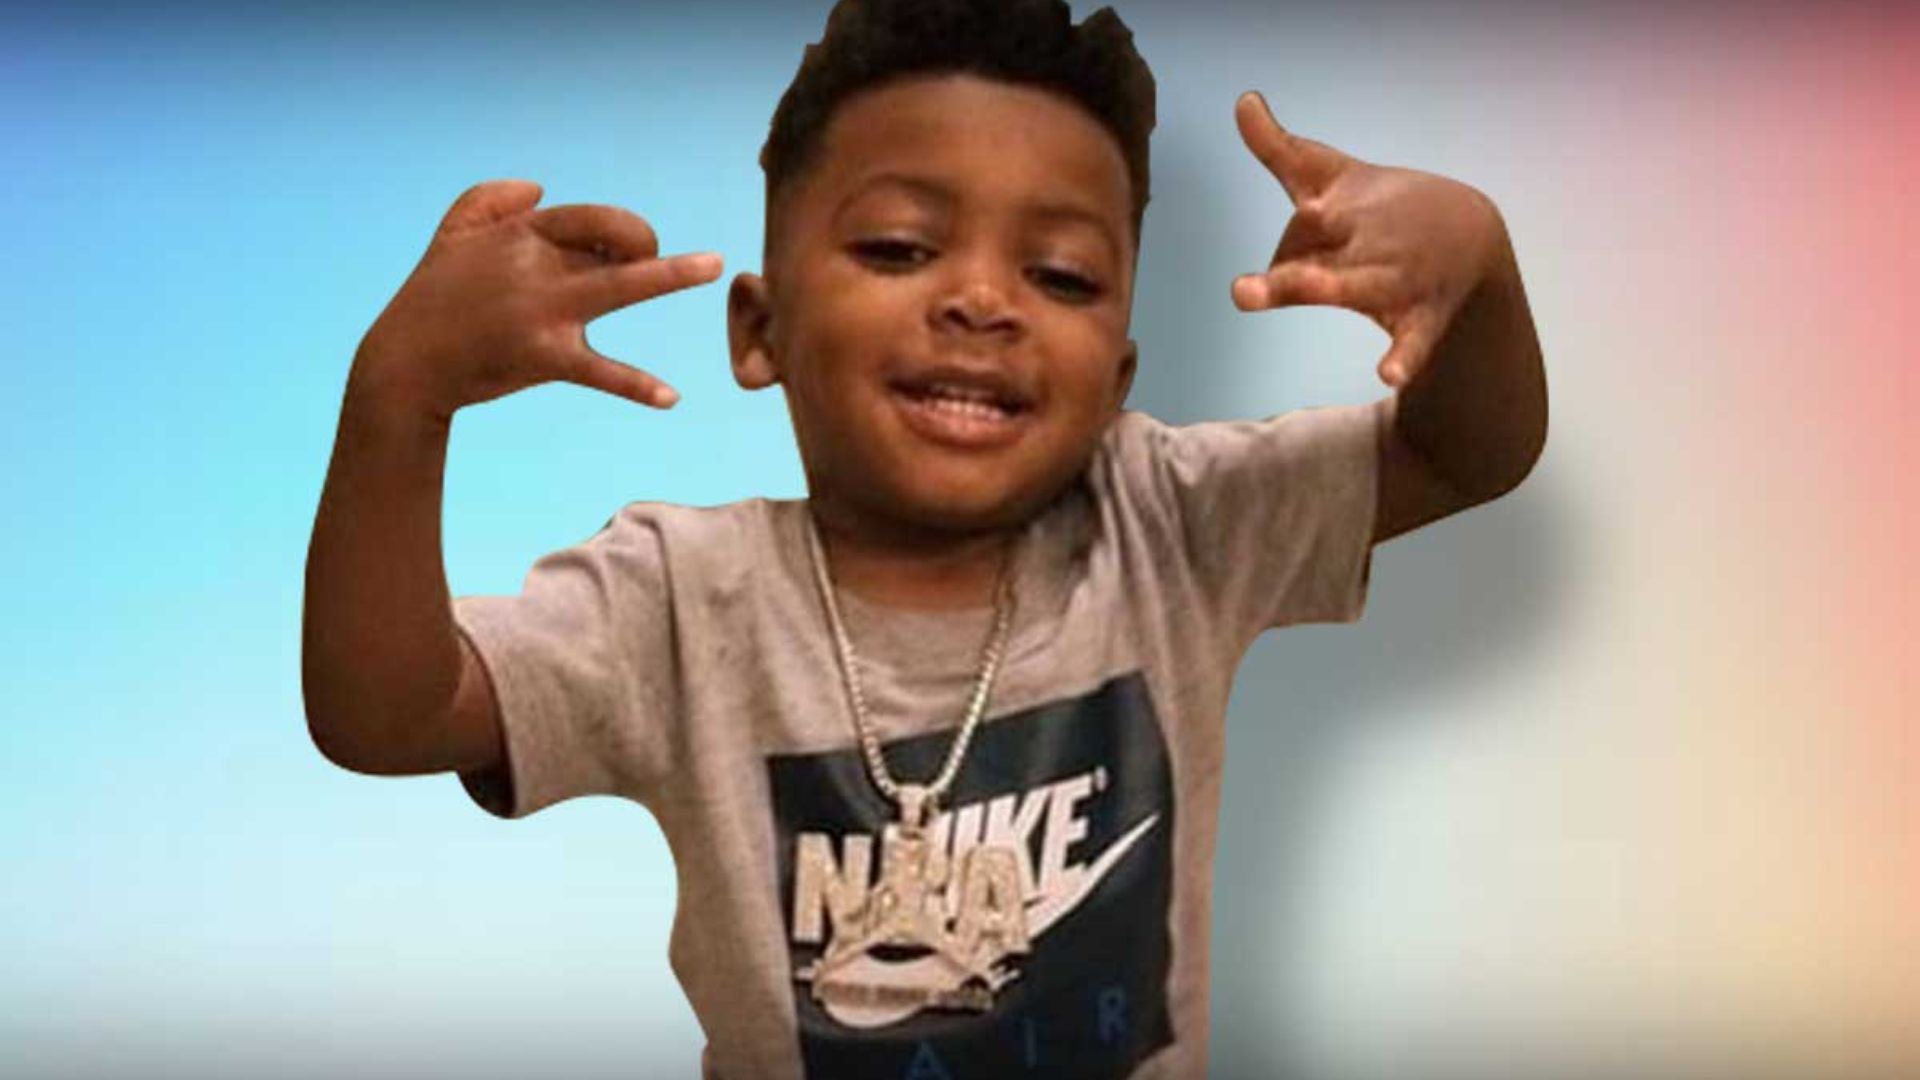 Kayden Gaulden - The Famous Son Of American Rapper NBA YoungBoy